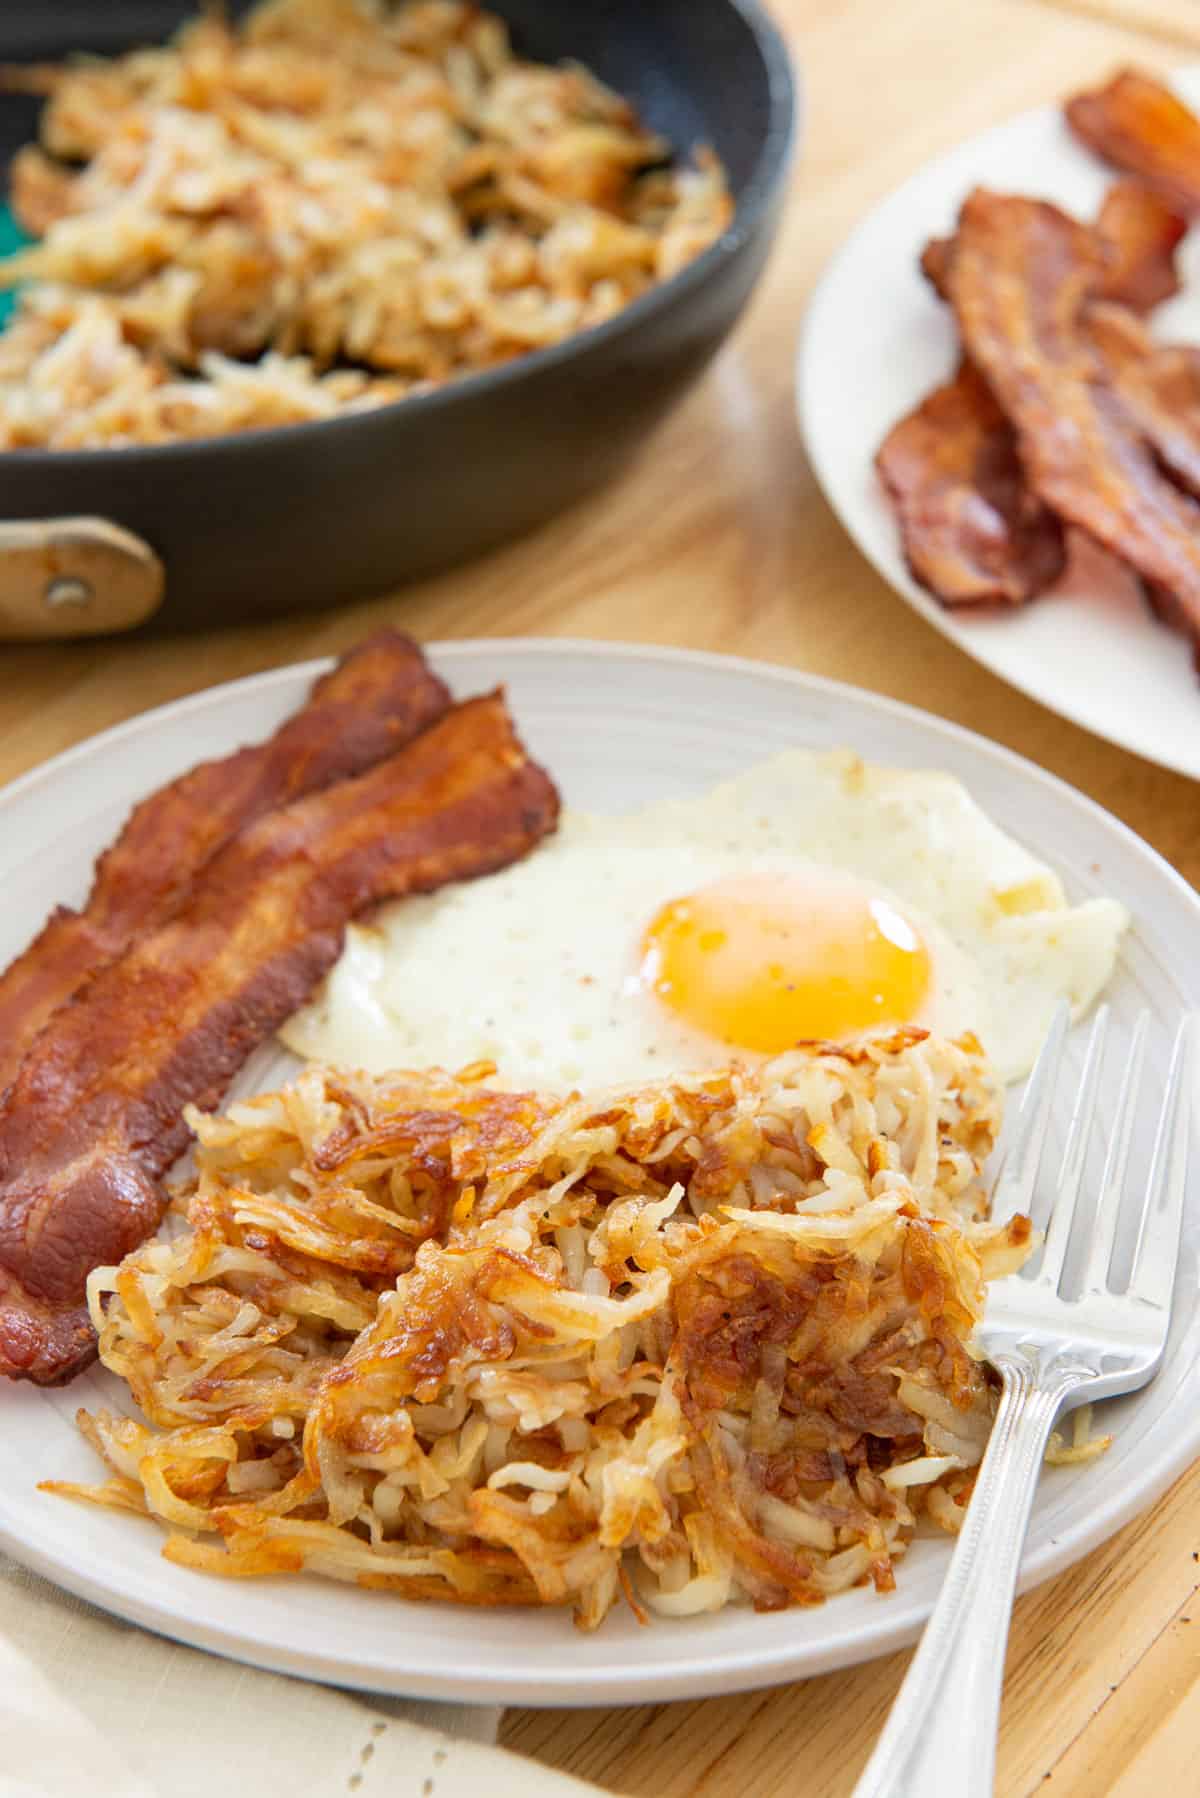 How to grate or shred homemade hashbrowns 